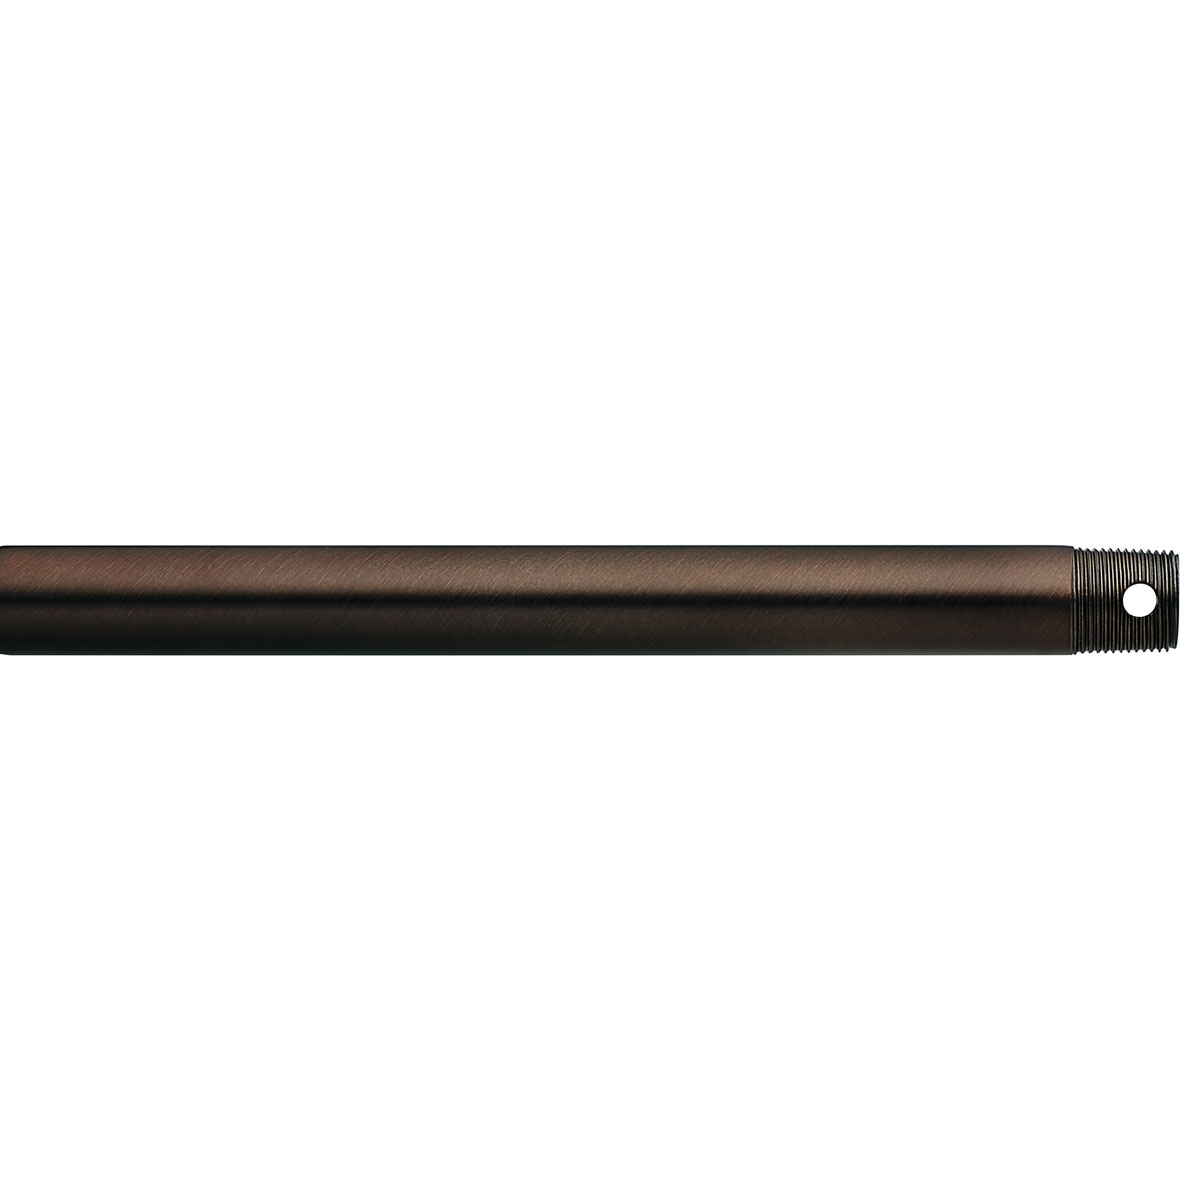 18 inch fan downrod (1 inch O.D.) suggested for 10 foot ceilings in Oil Brushed Bronze